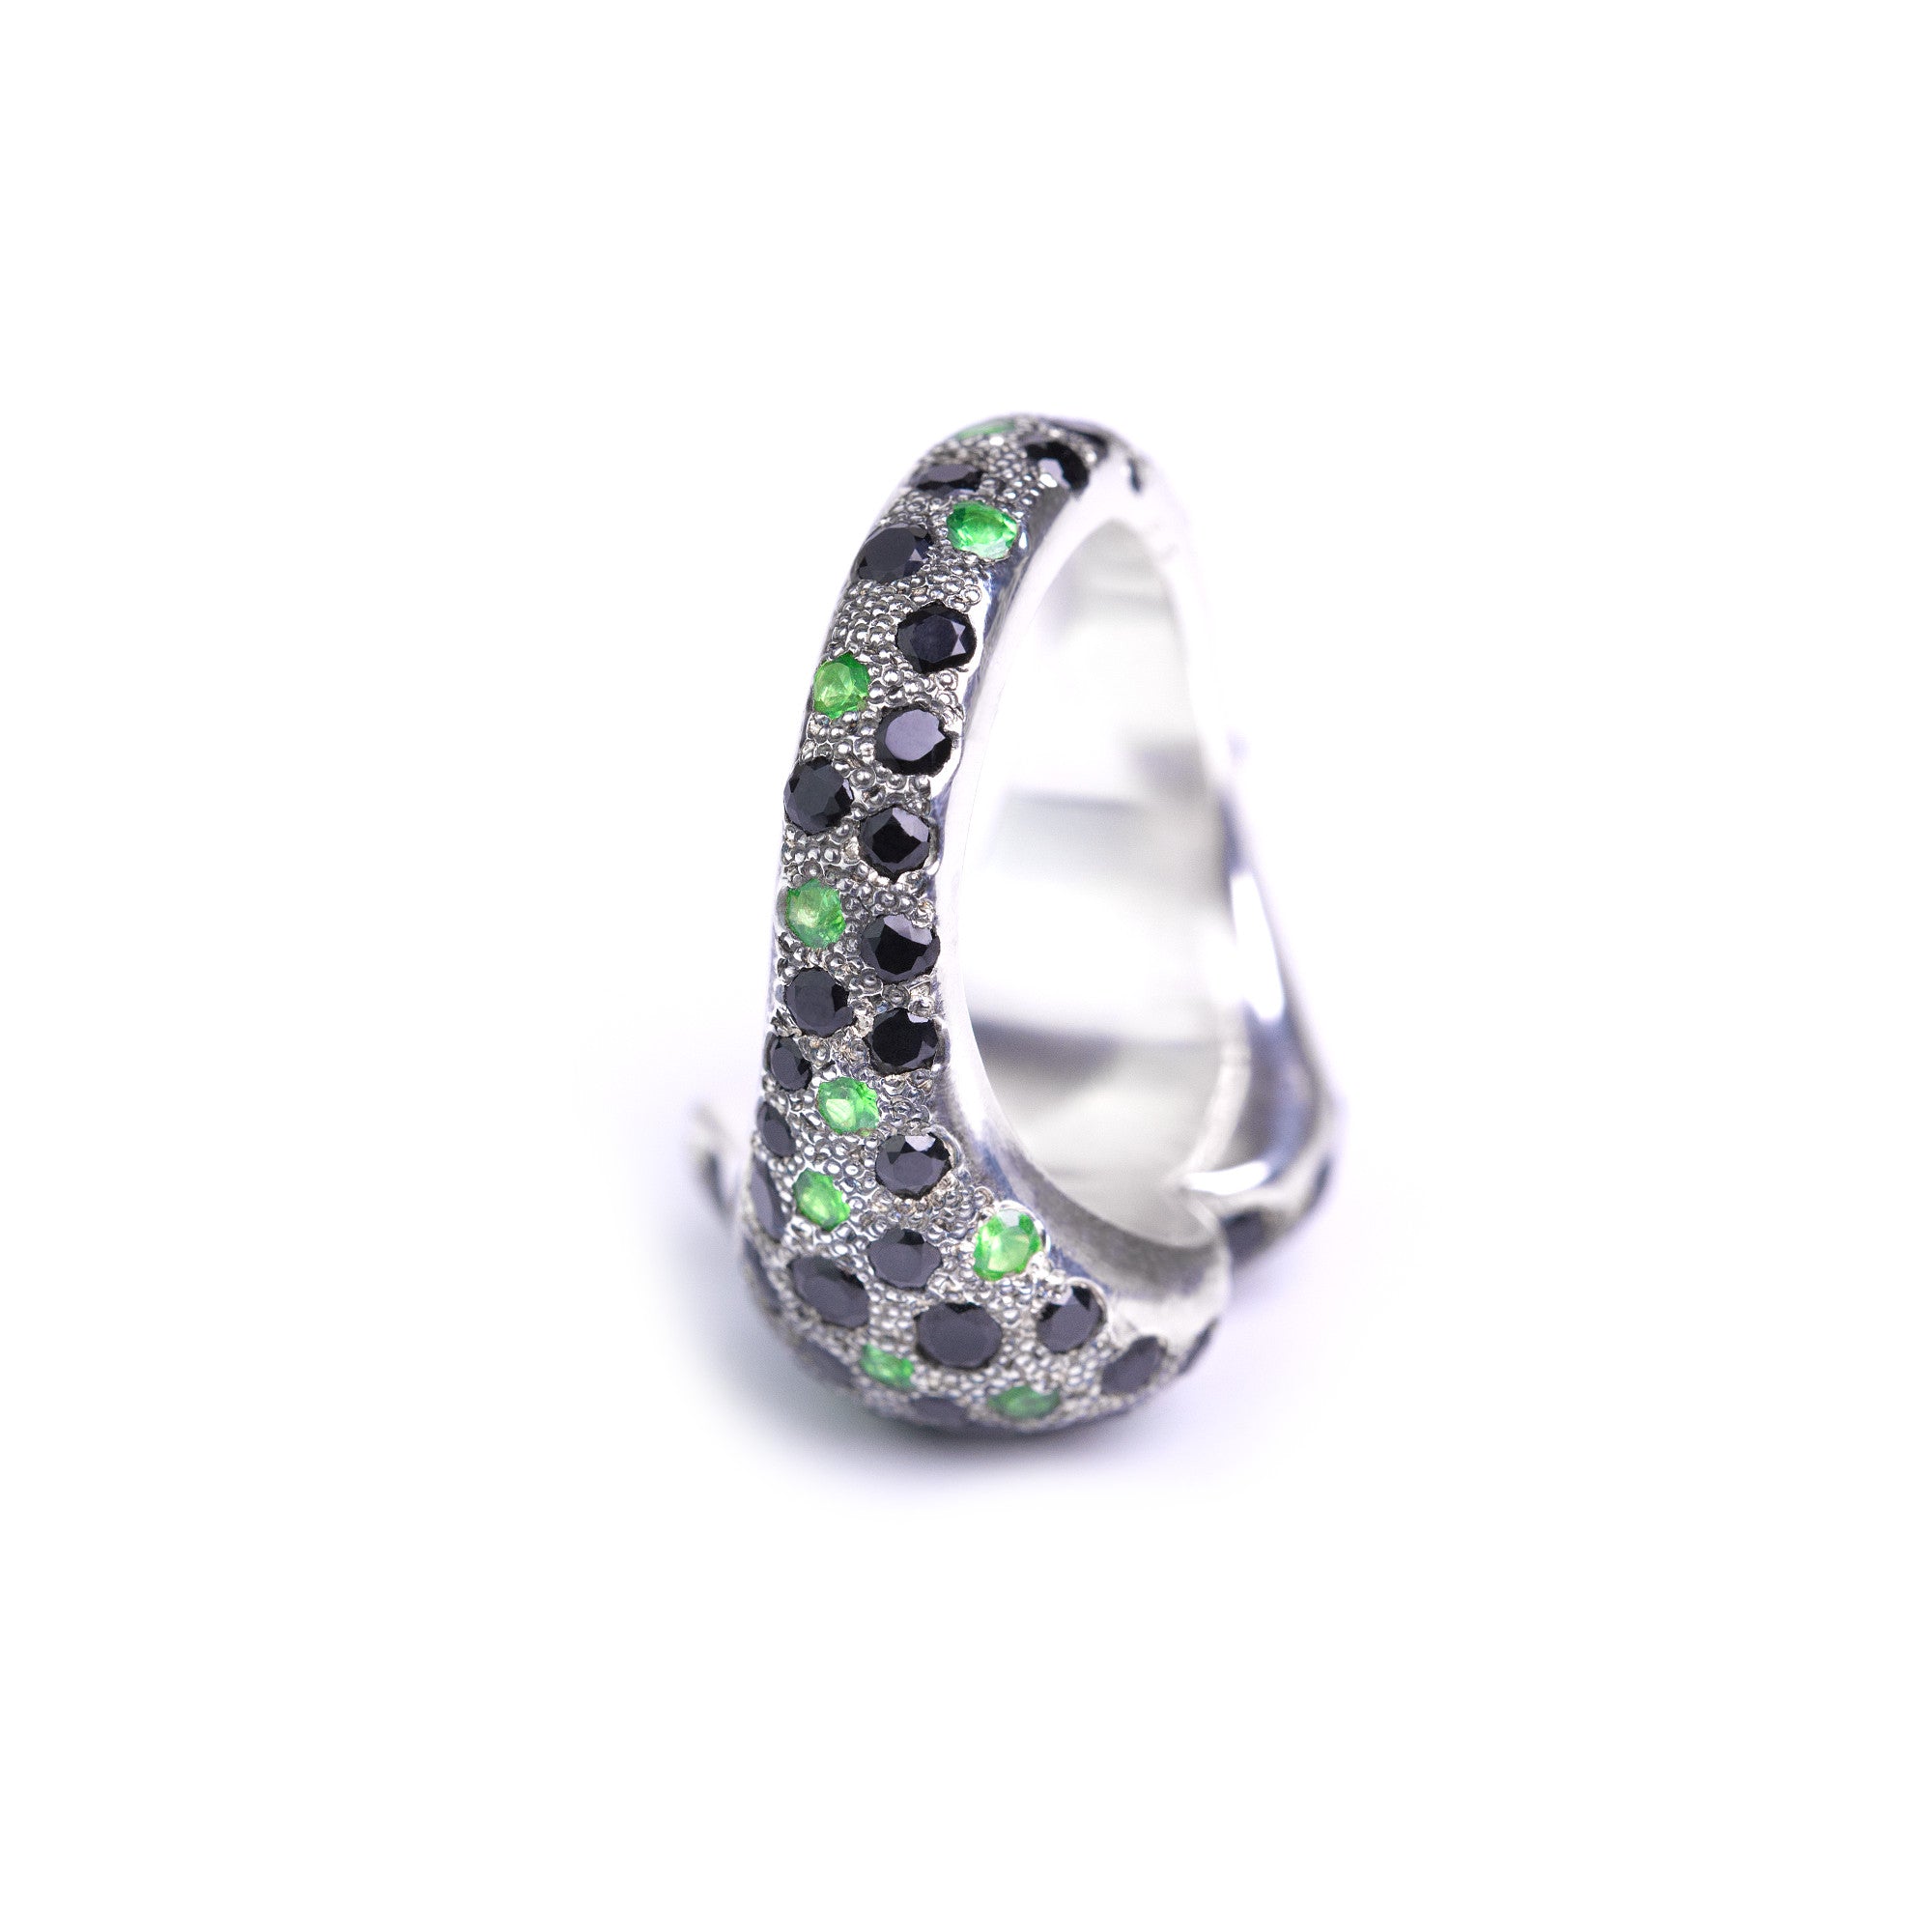 Side view - Art Deco ring with tsavorites and black spinel, Heart Sygnet by Ewa Z. Sleziona